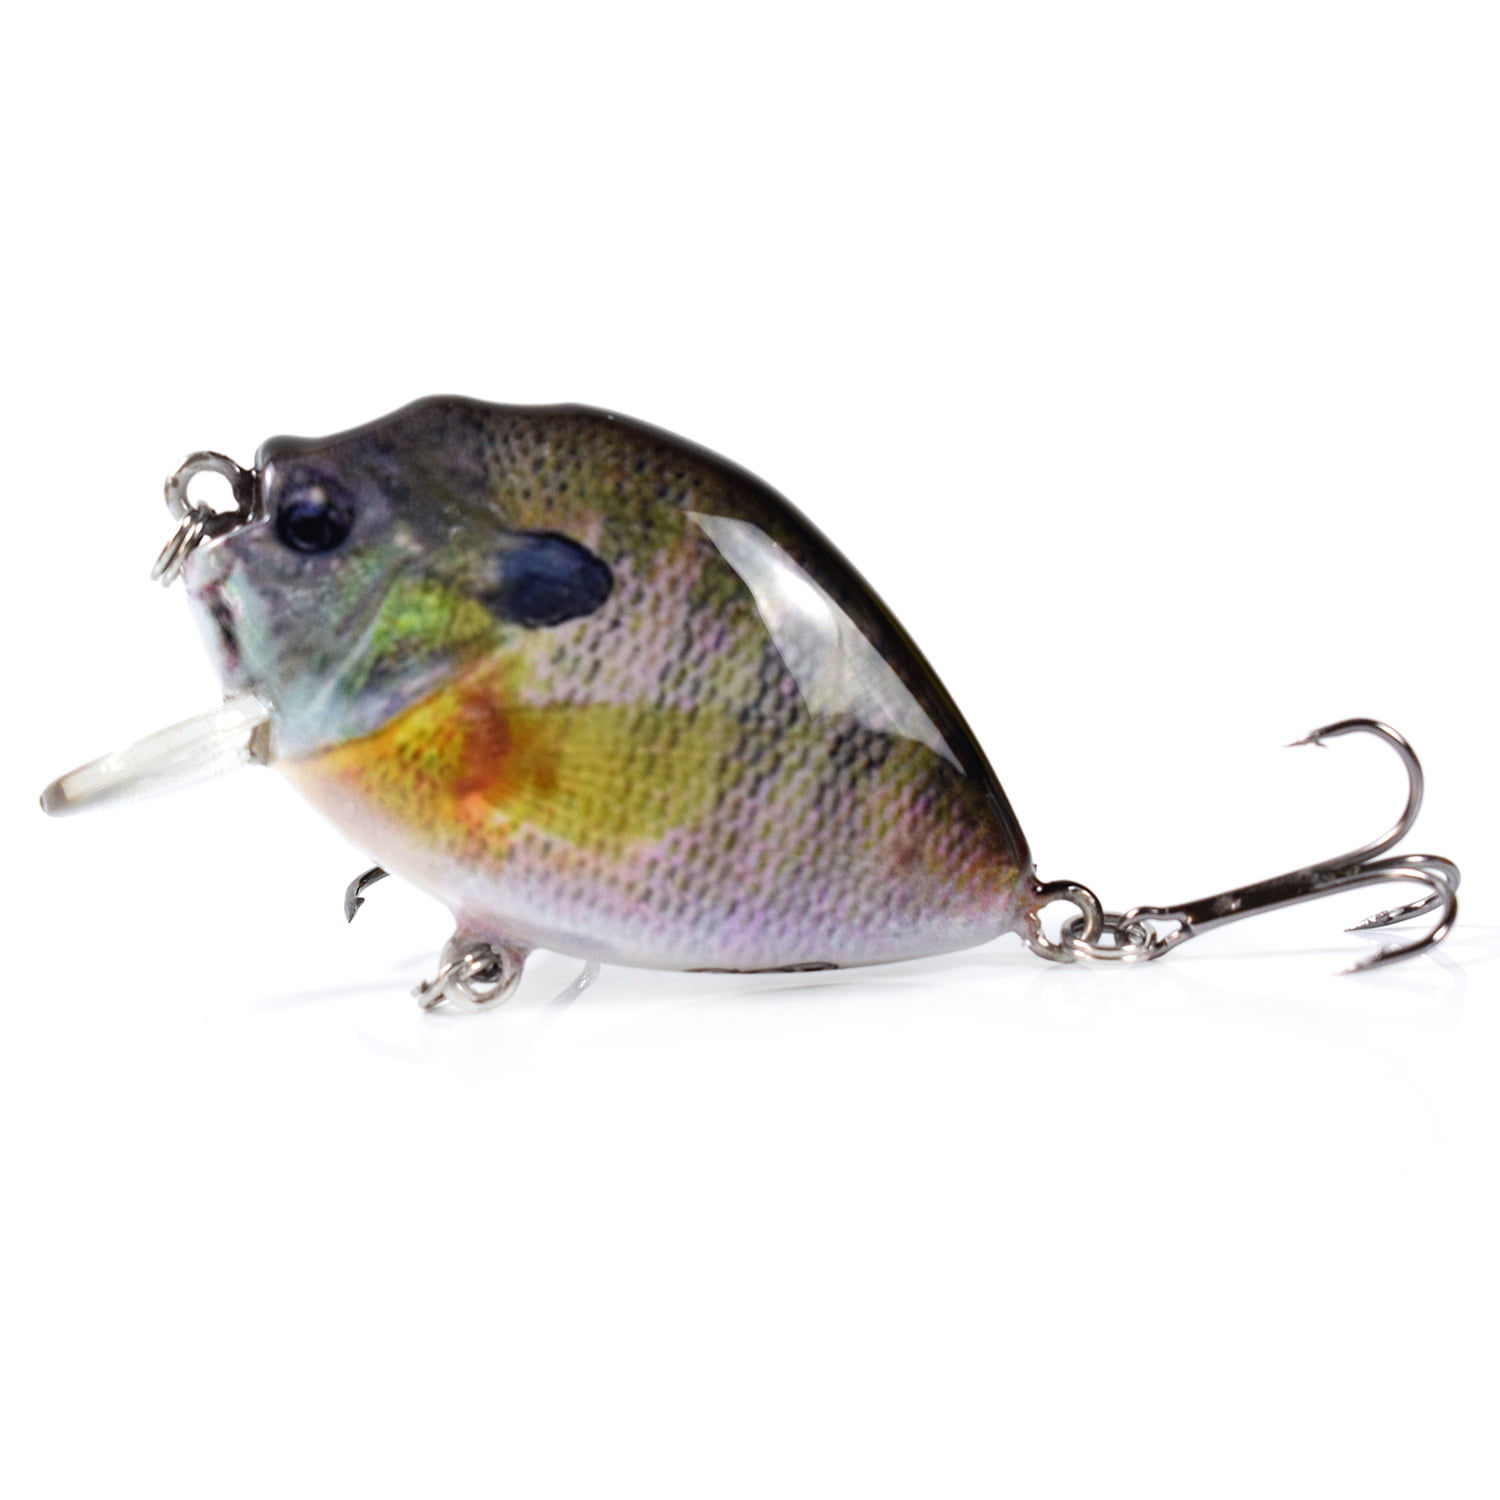 2 section 3D 6 inch Bluegill swimbait Brush Tail Lunker Lure Bass 2 ounce 